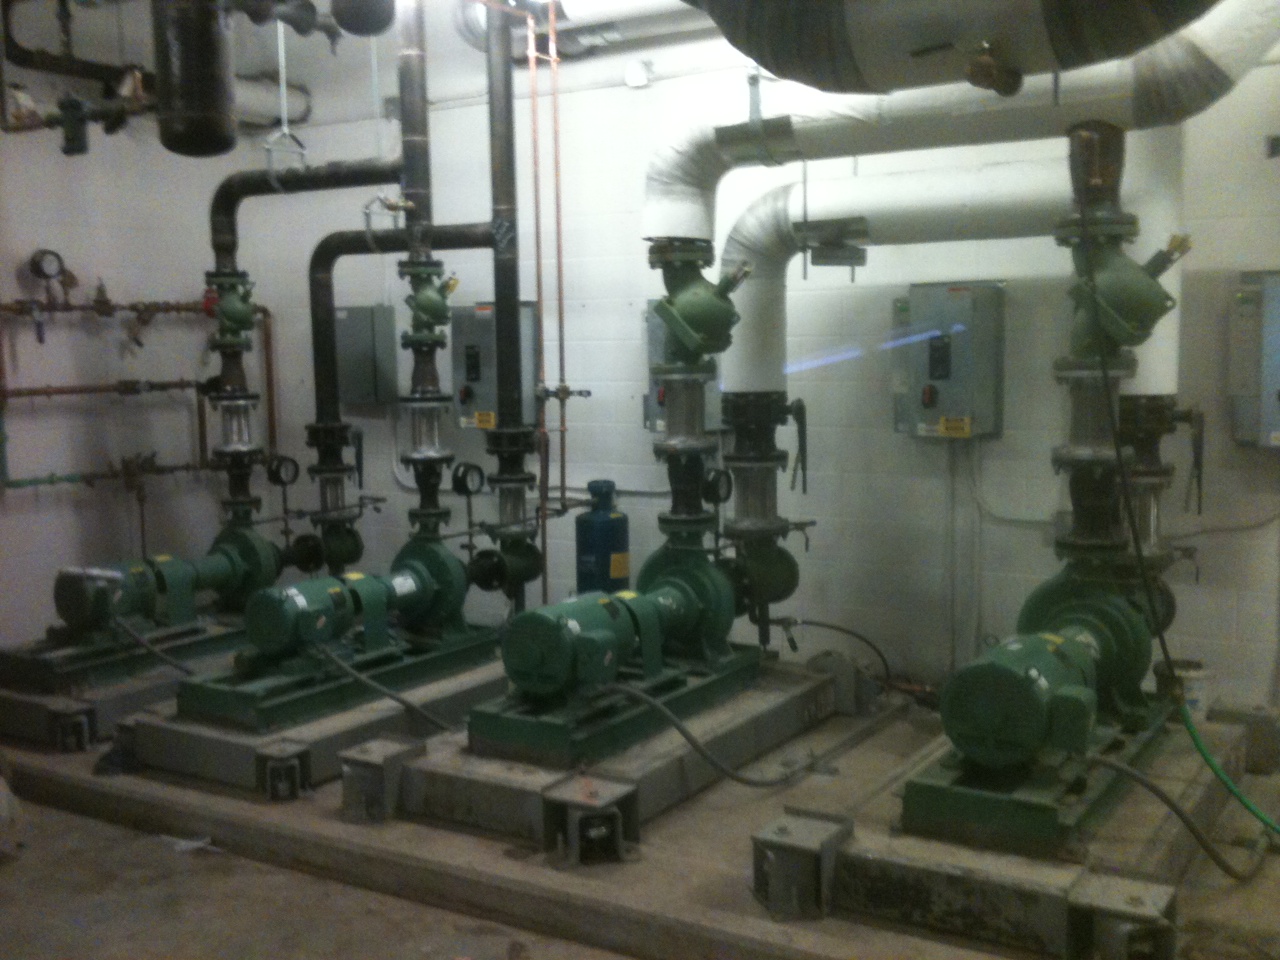 Pumps at University of Tennessee Translational Sciences Research